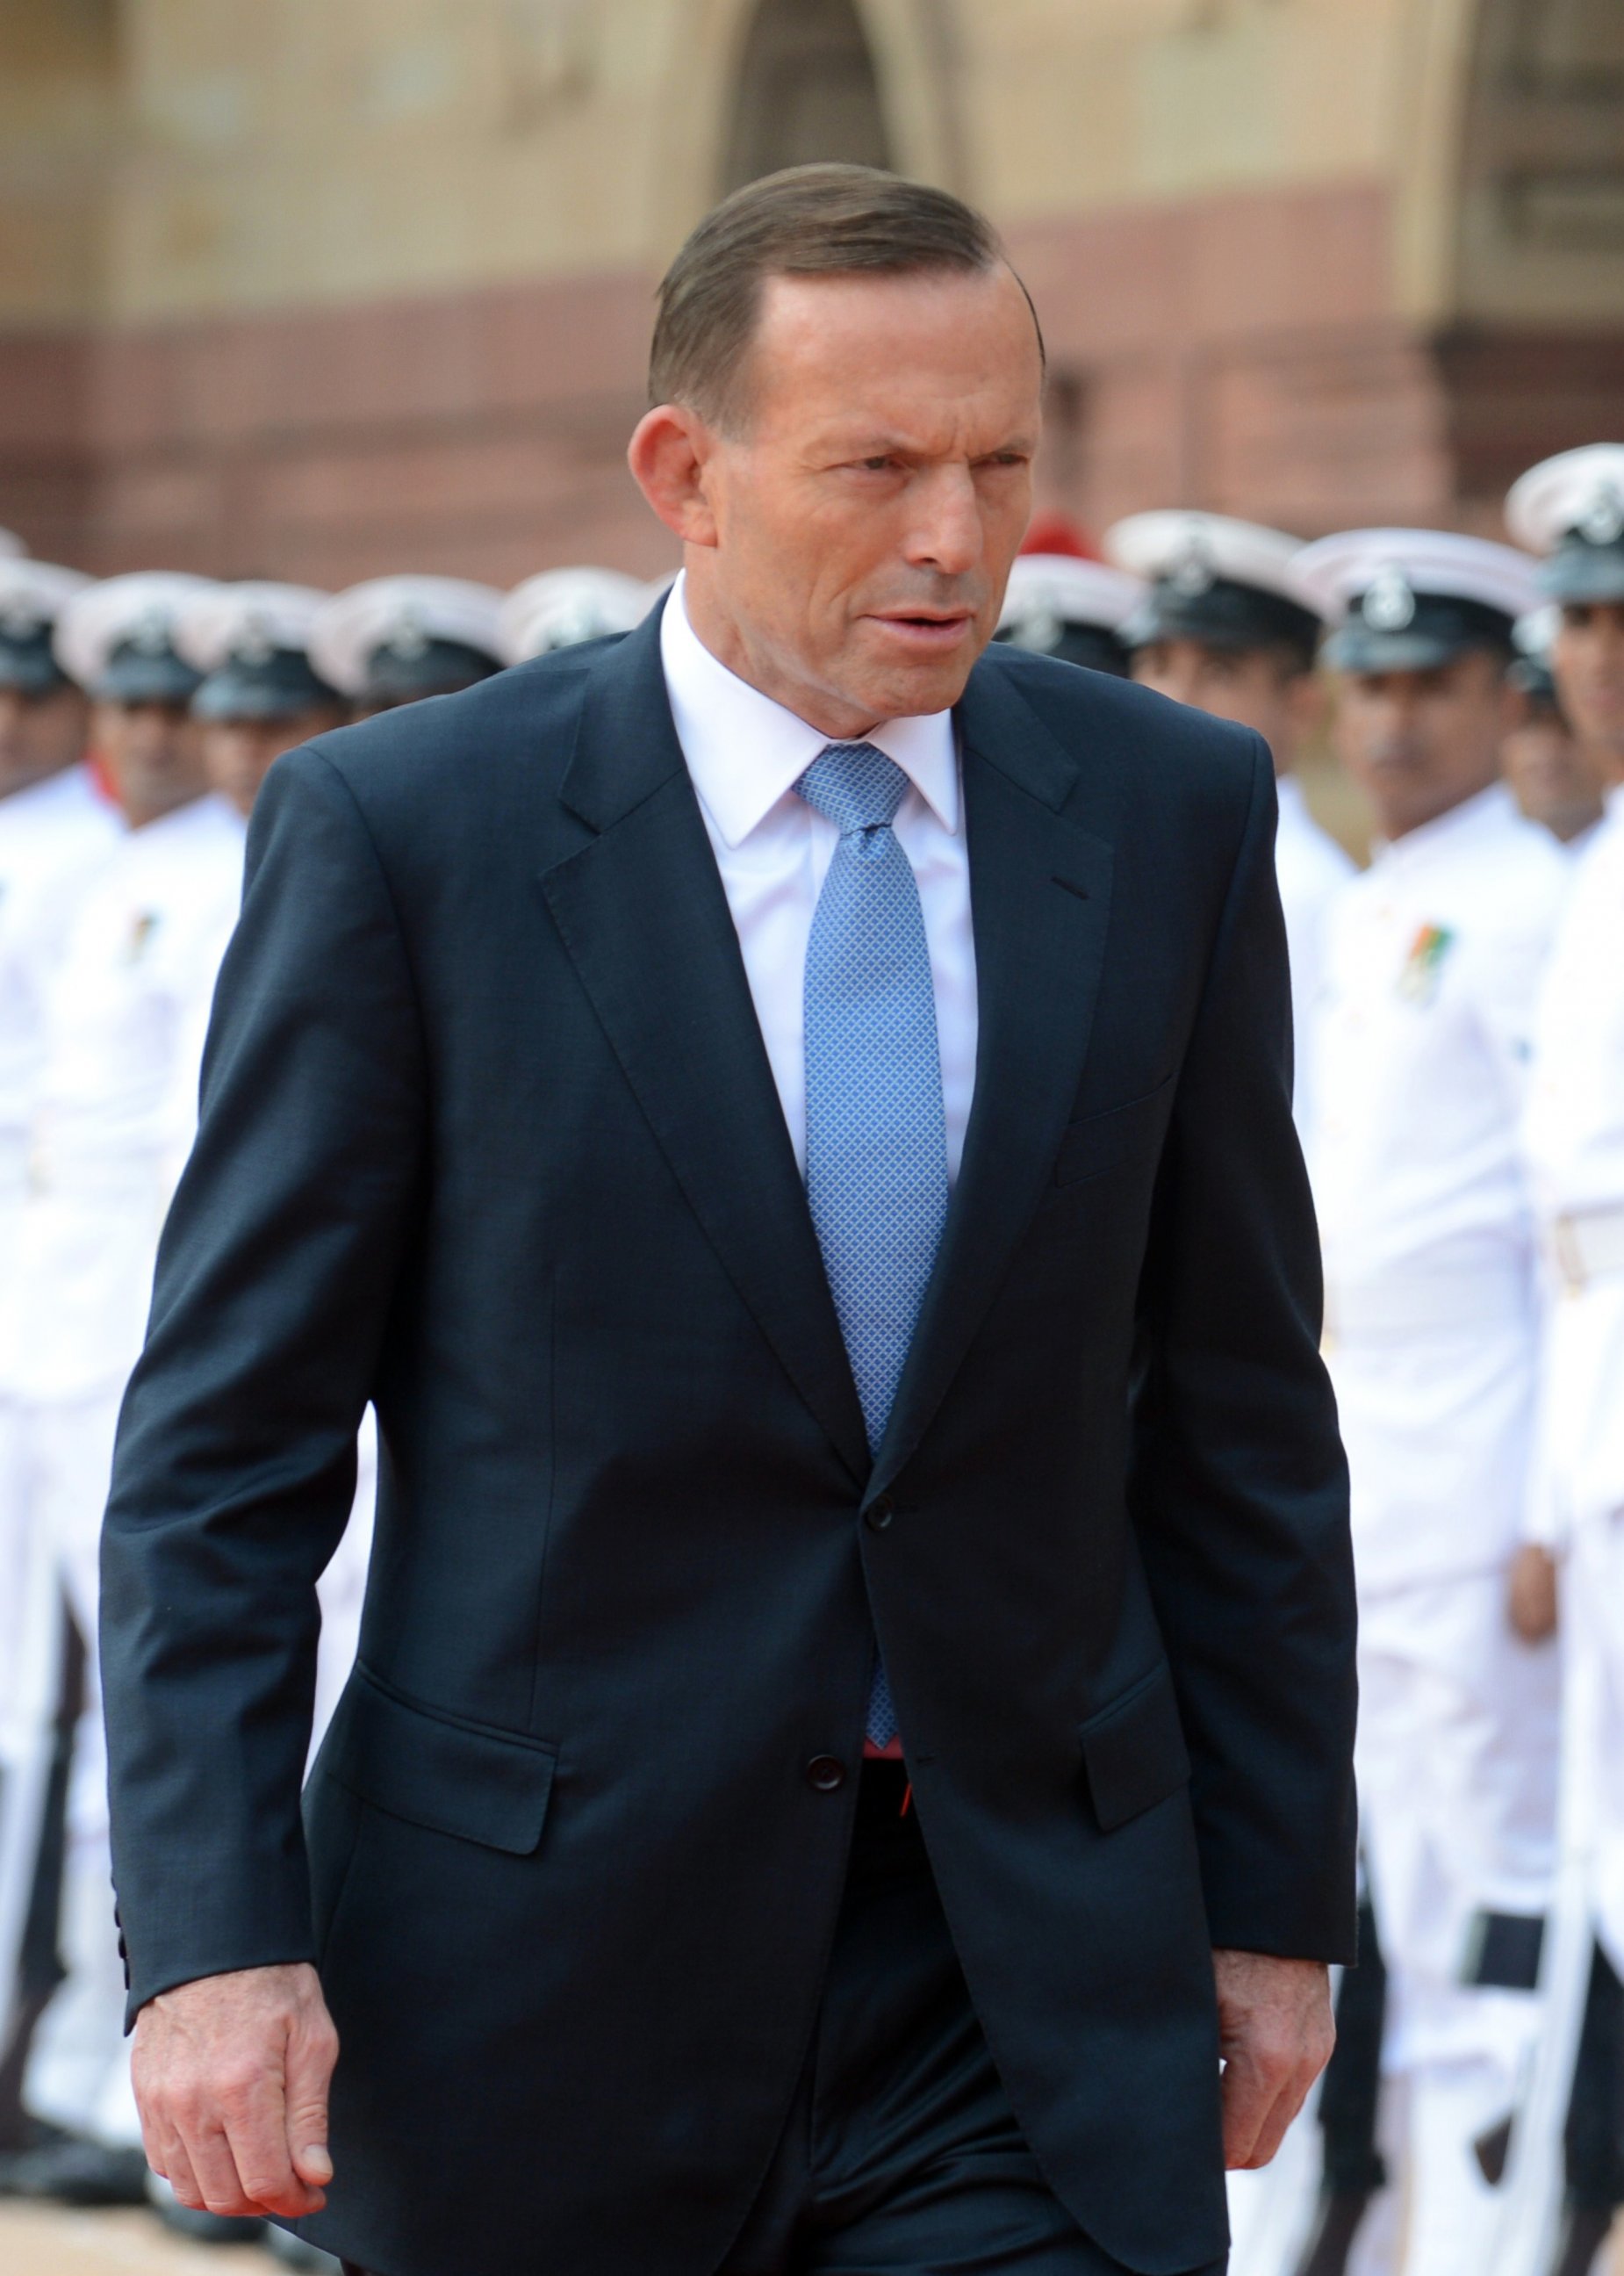 PHOTO: Australian Prime Minister Tony Abbott walks past an honor guard during a welcoming ceremony at the presidential palace in New Delhi, Sept. 5, 2014. 